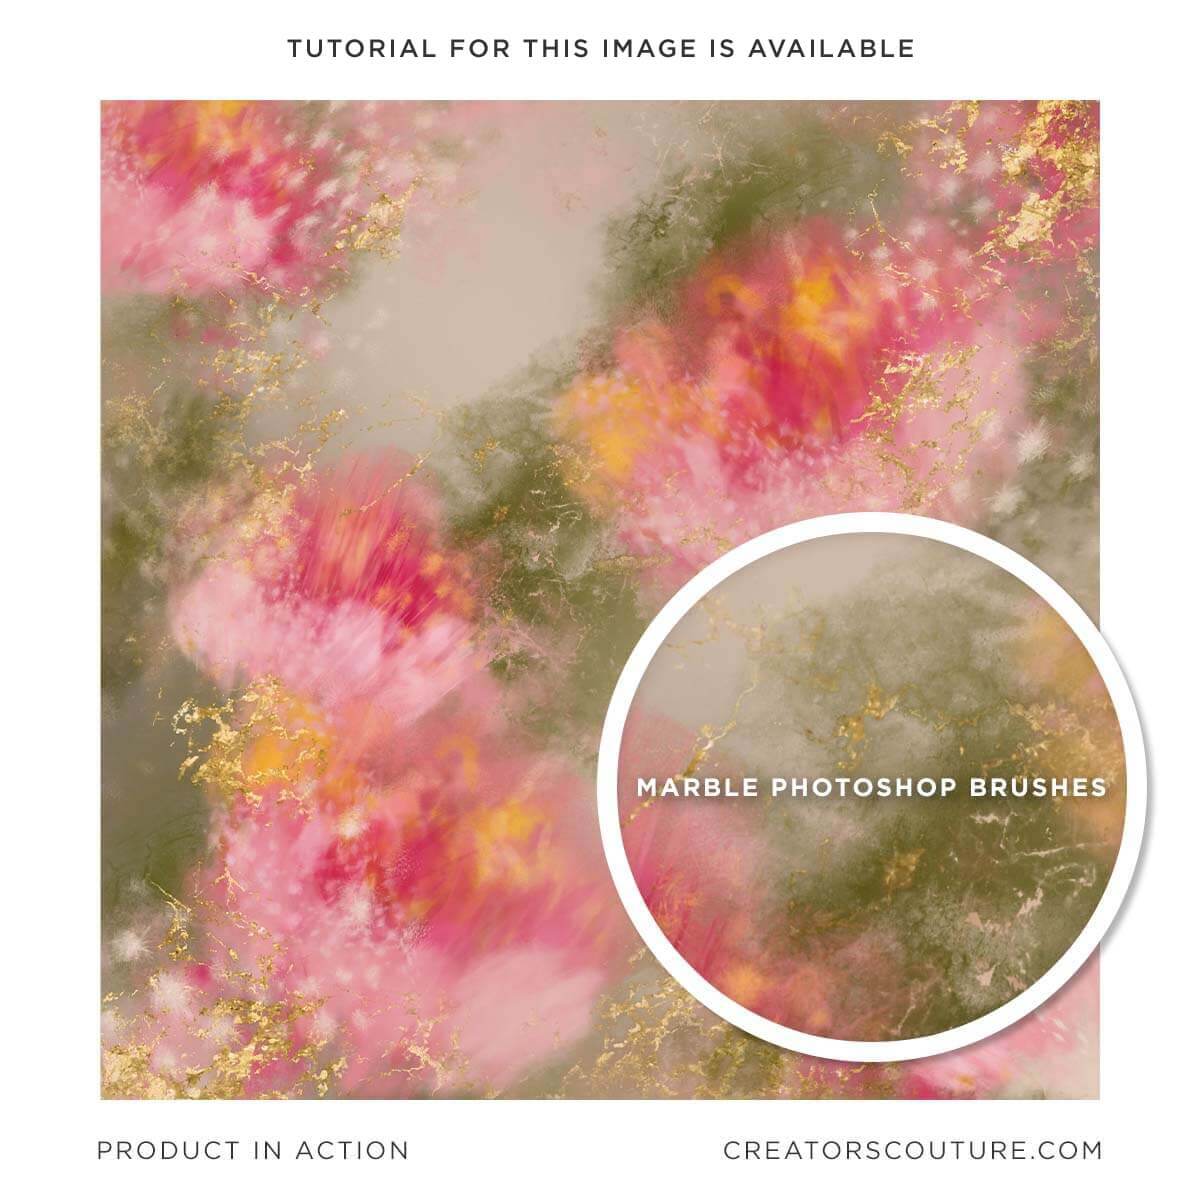 Delicate watercolor, flower, illustration, pink flowers with a green and cream background. Close up marble accent with metallic gold